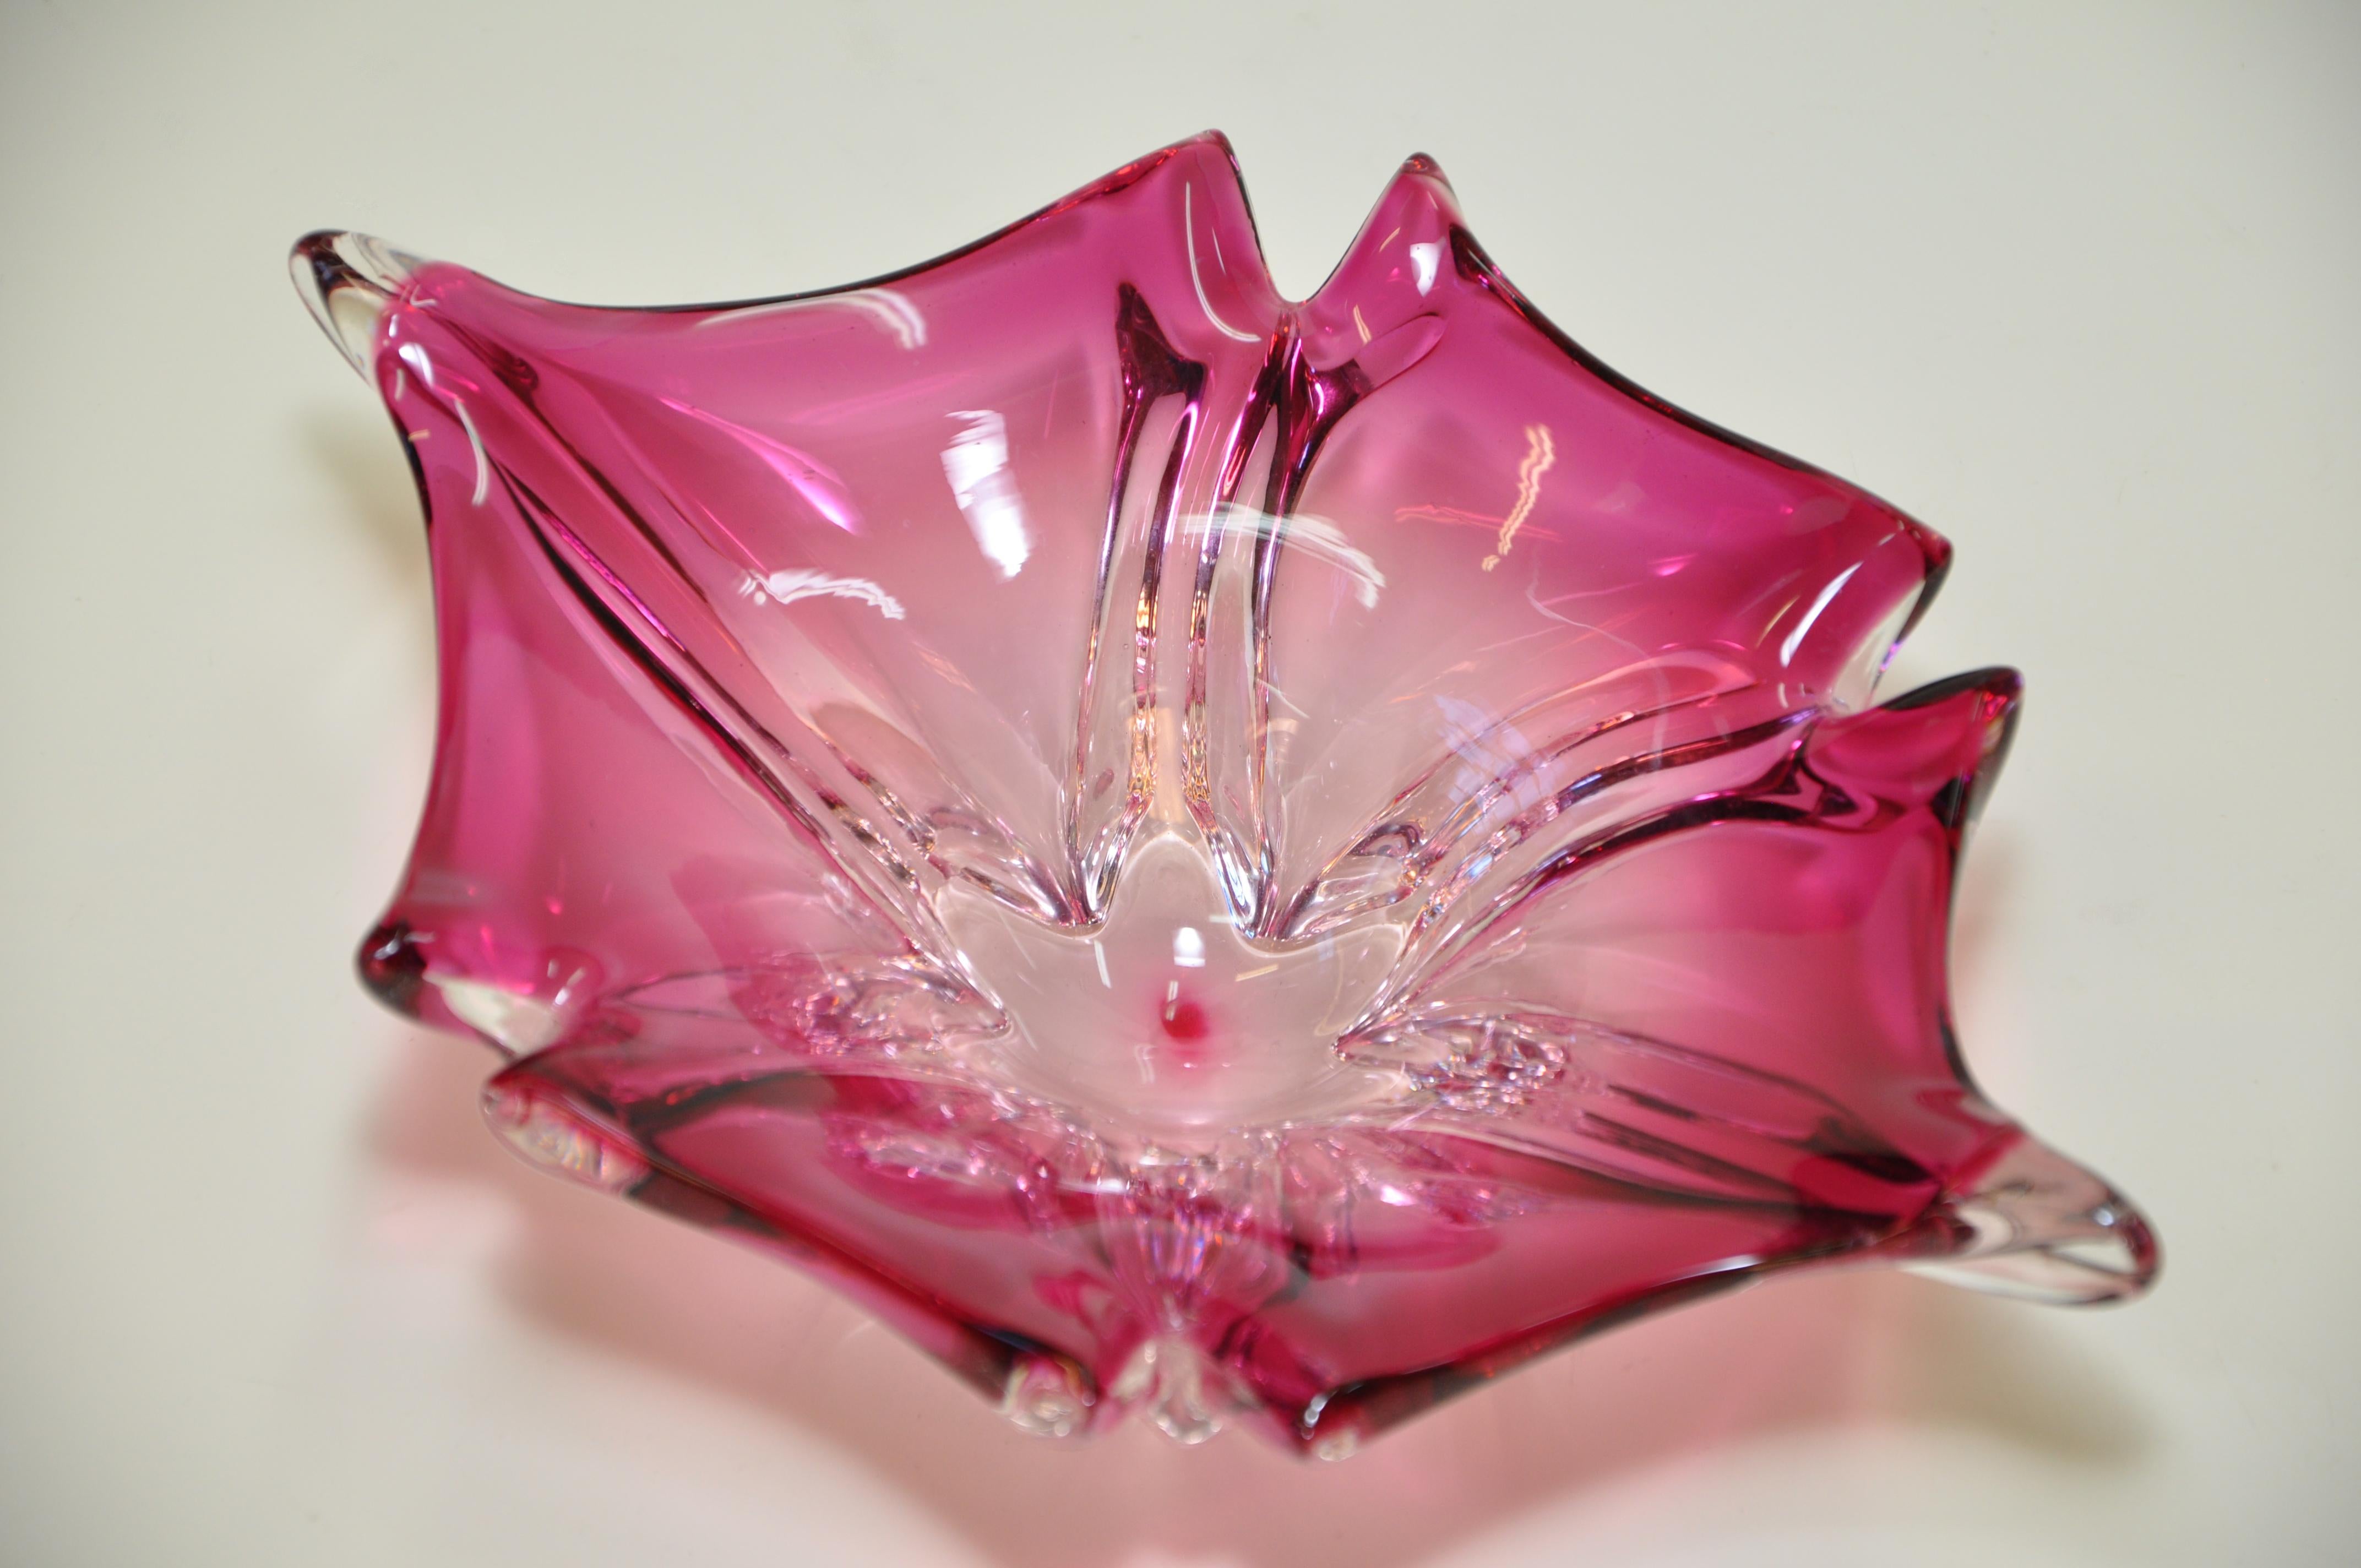 Stunning vintage pink art glass bowl Italian Murano

Stunning vintage pink art glass bowl Italian a stunning vintage piece of art glass in a strong pink. This piece is wonderful as it would look great matched with antique or Mid-Century Modern